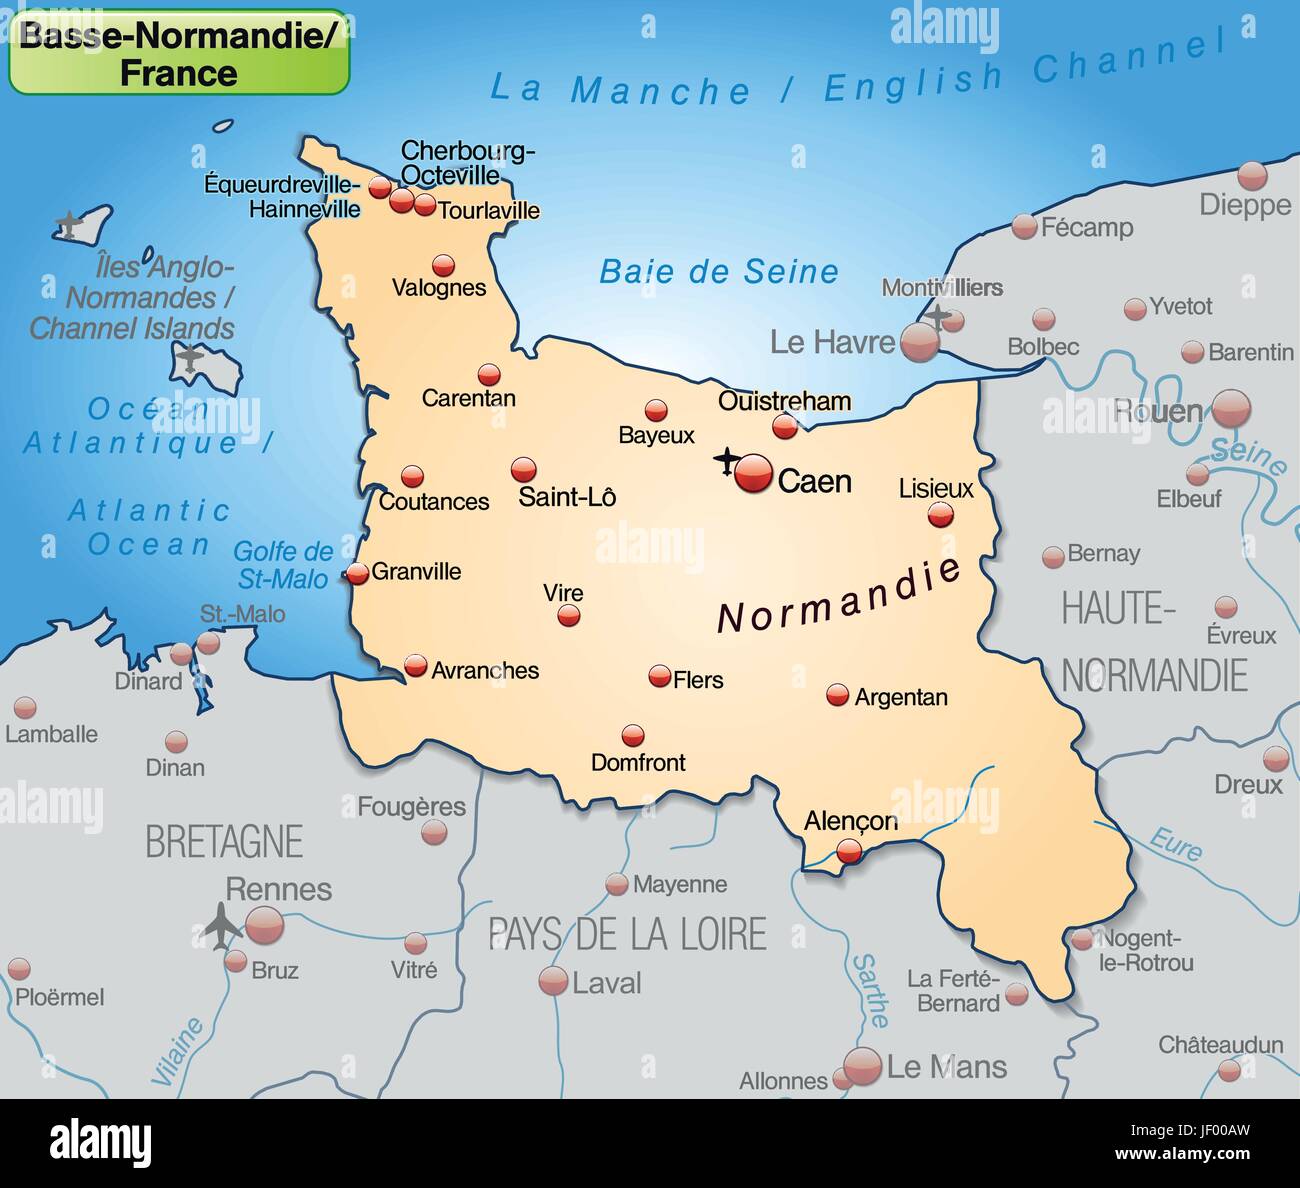 Ile De France Normandie Laminated Map Canada Wall Maps Of The World ...